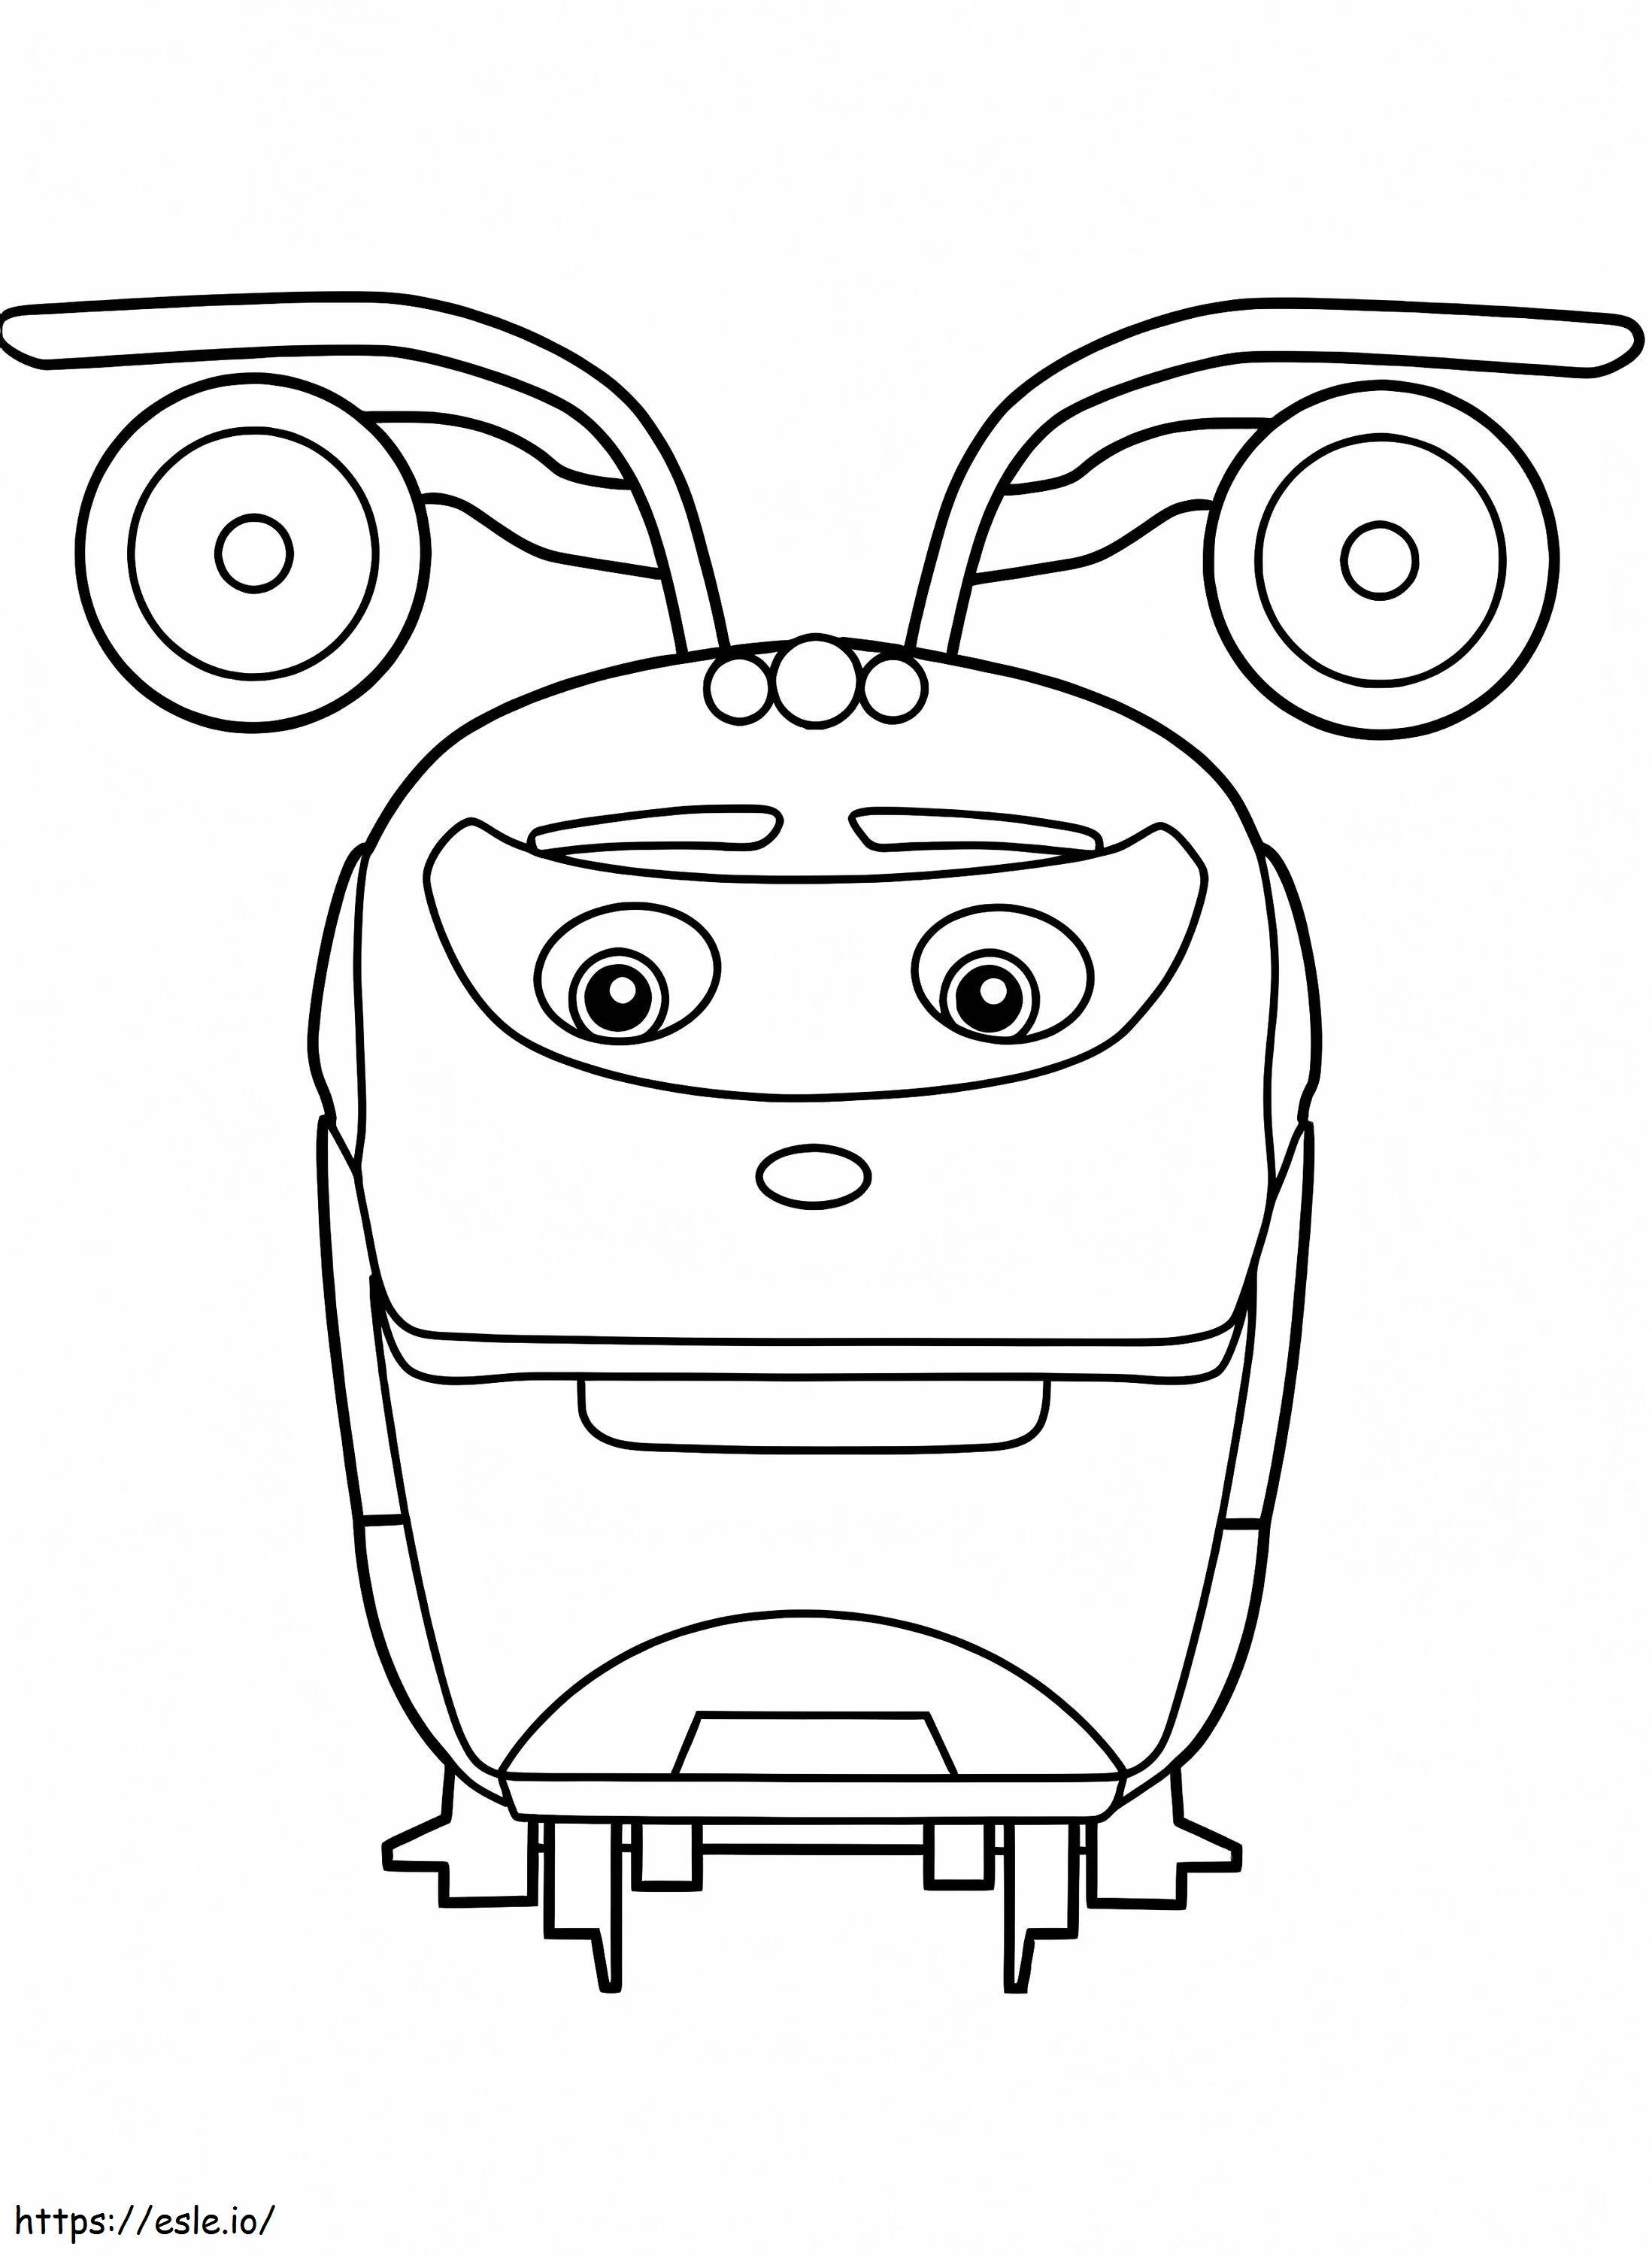 Action Chugger From Chuggington coloring page